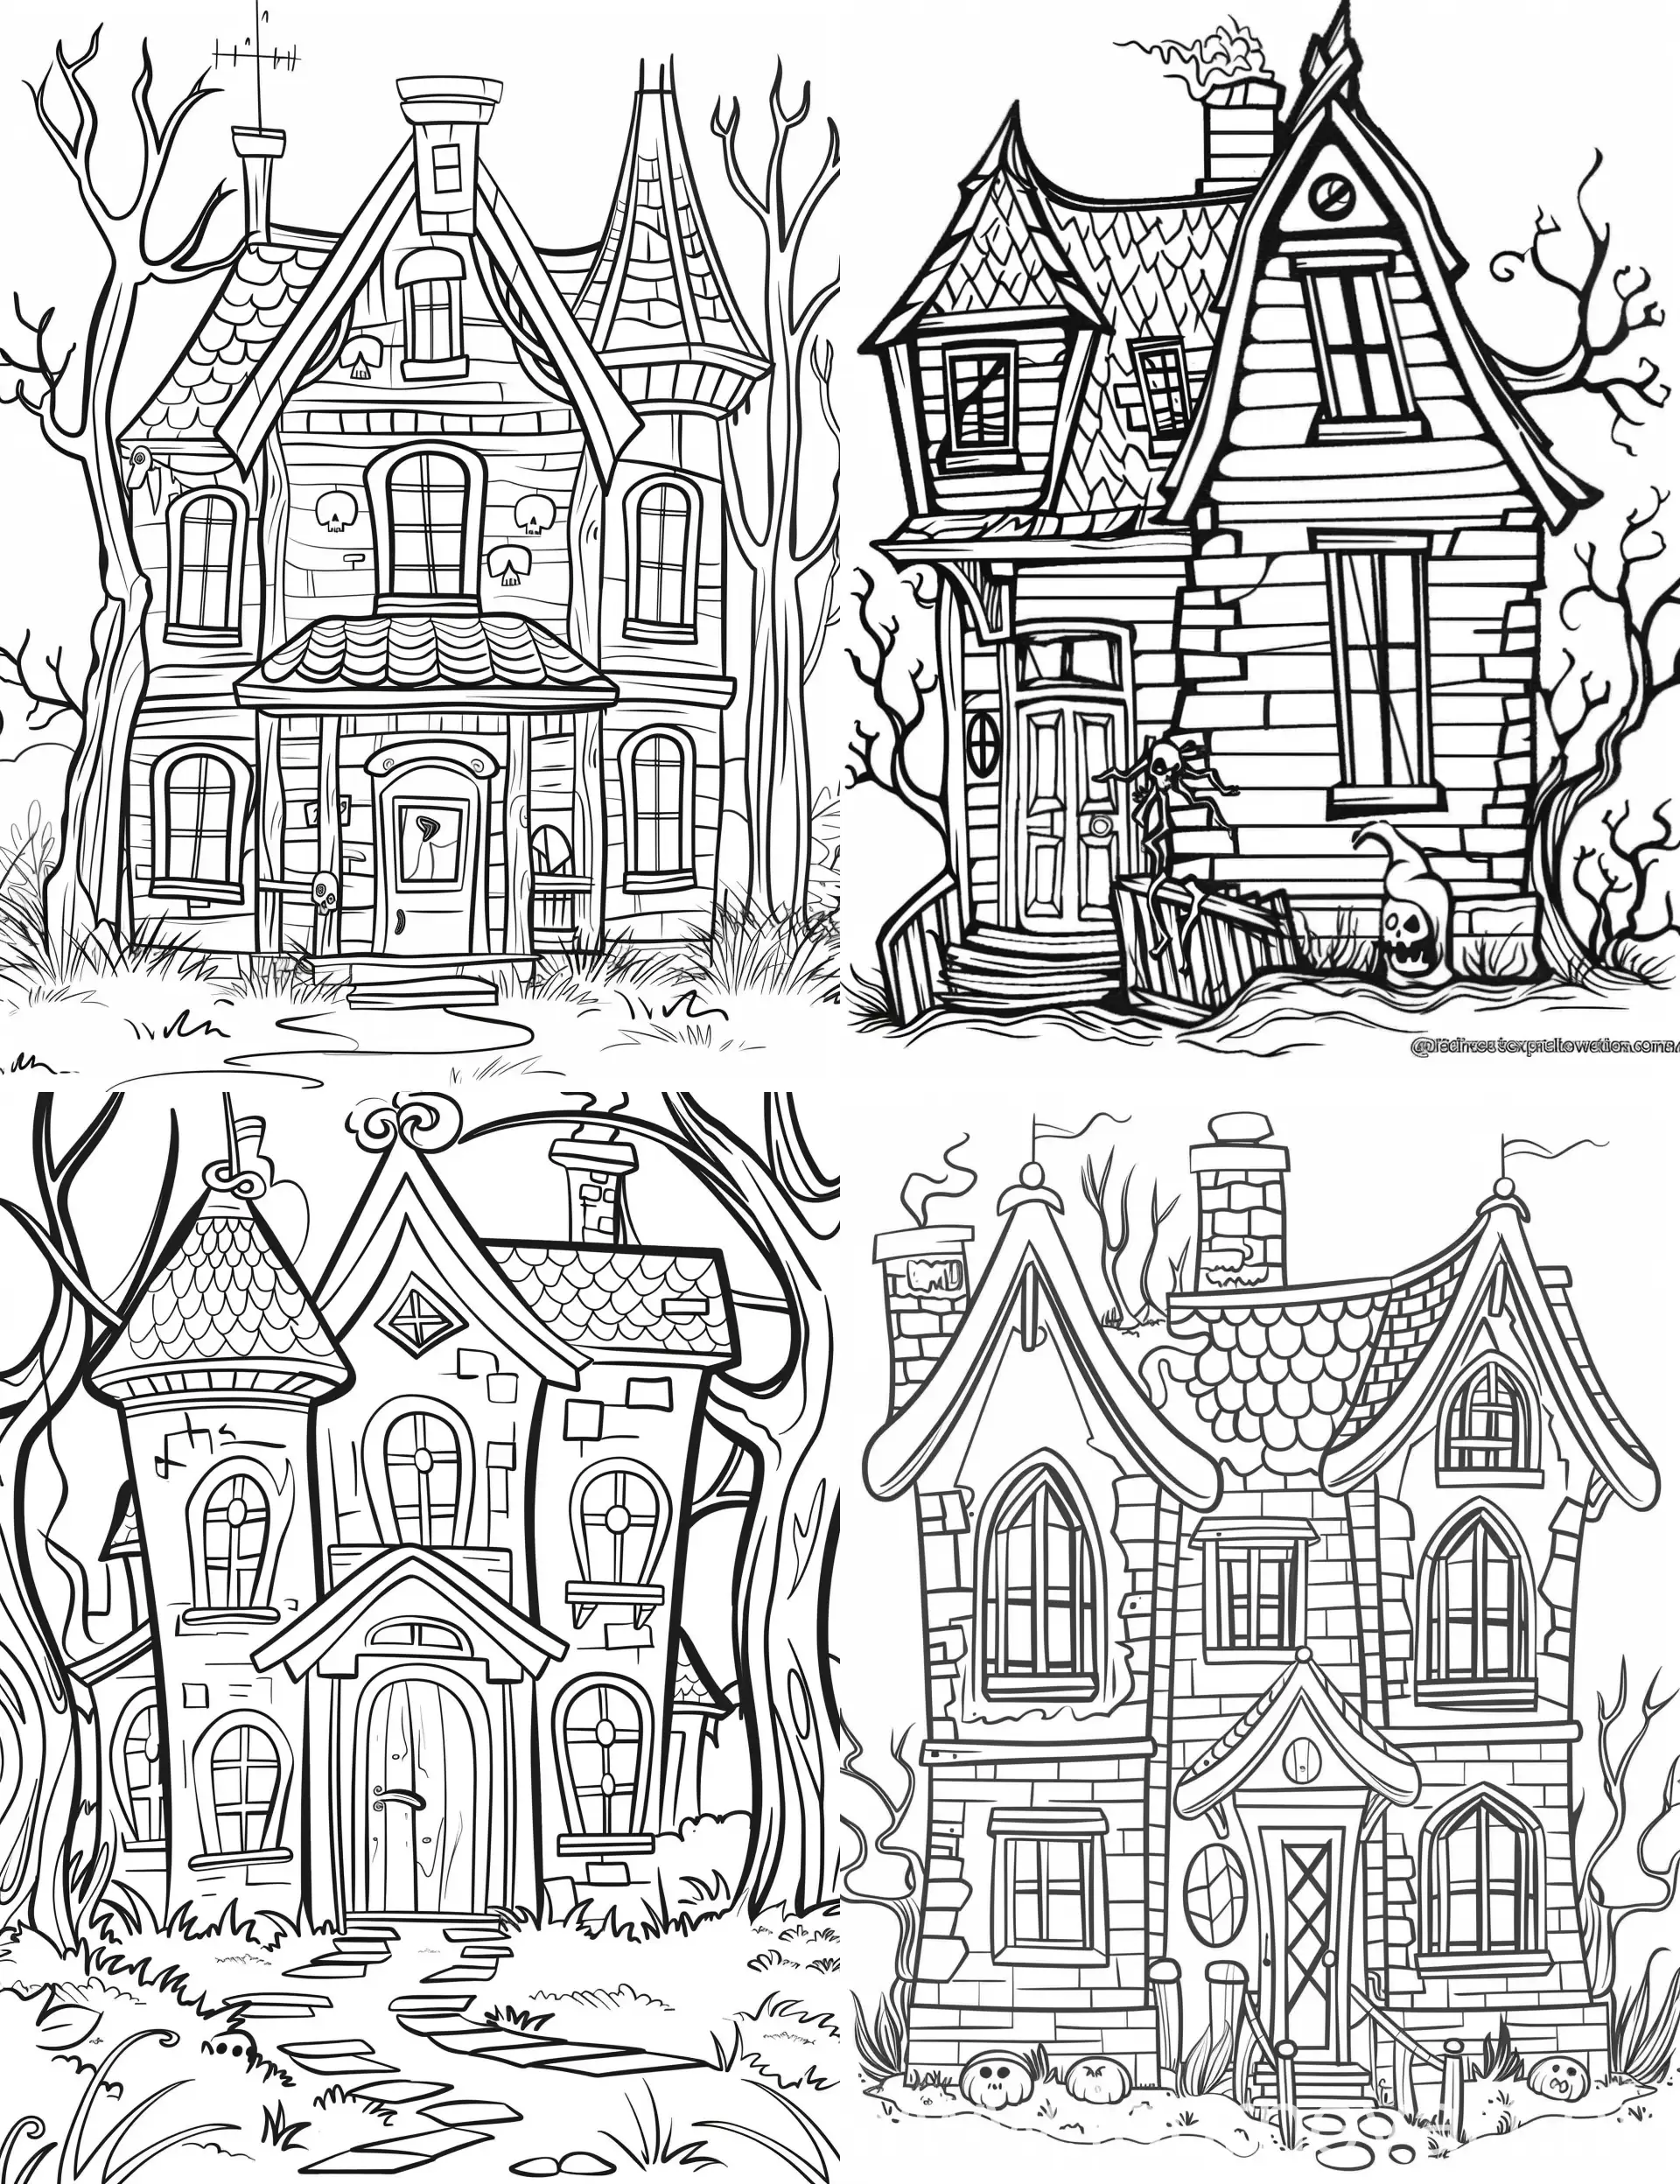 coloring pages for kids, haunted house, cartoon style, thick lines, low detail, black and white, no shading, --ar 85:110